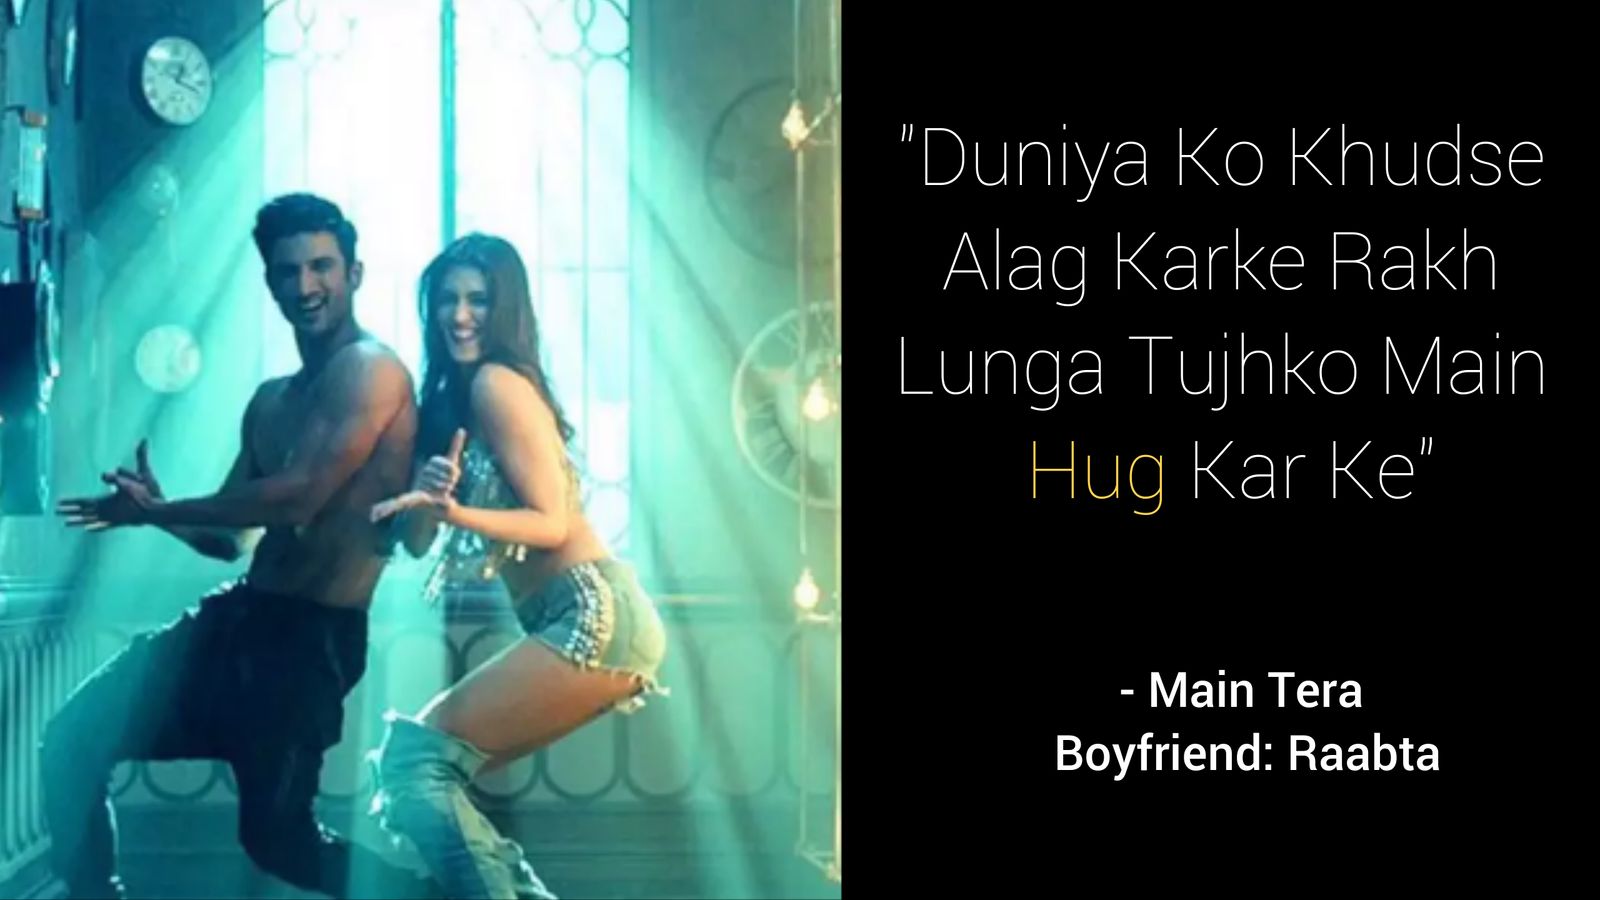 10 Bollywood Songs That Aptly Capture Our 'Shitty' Problems